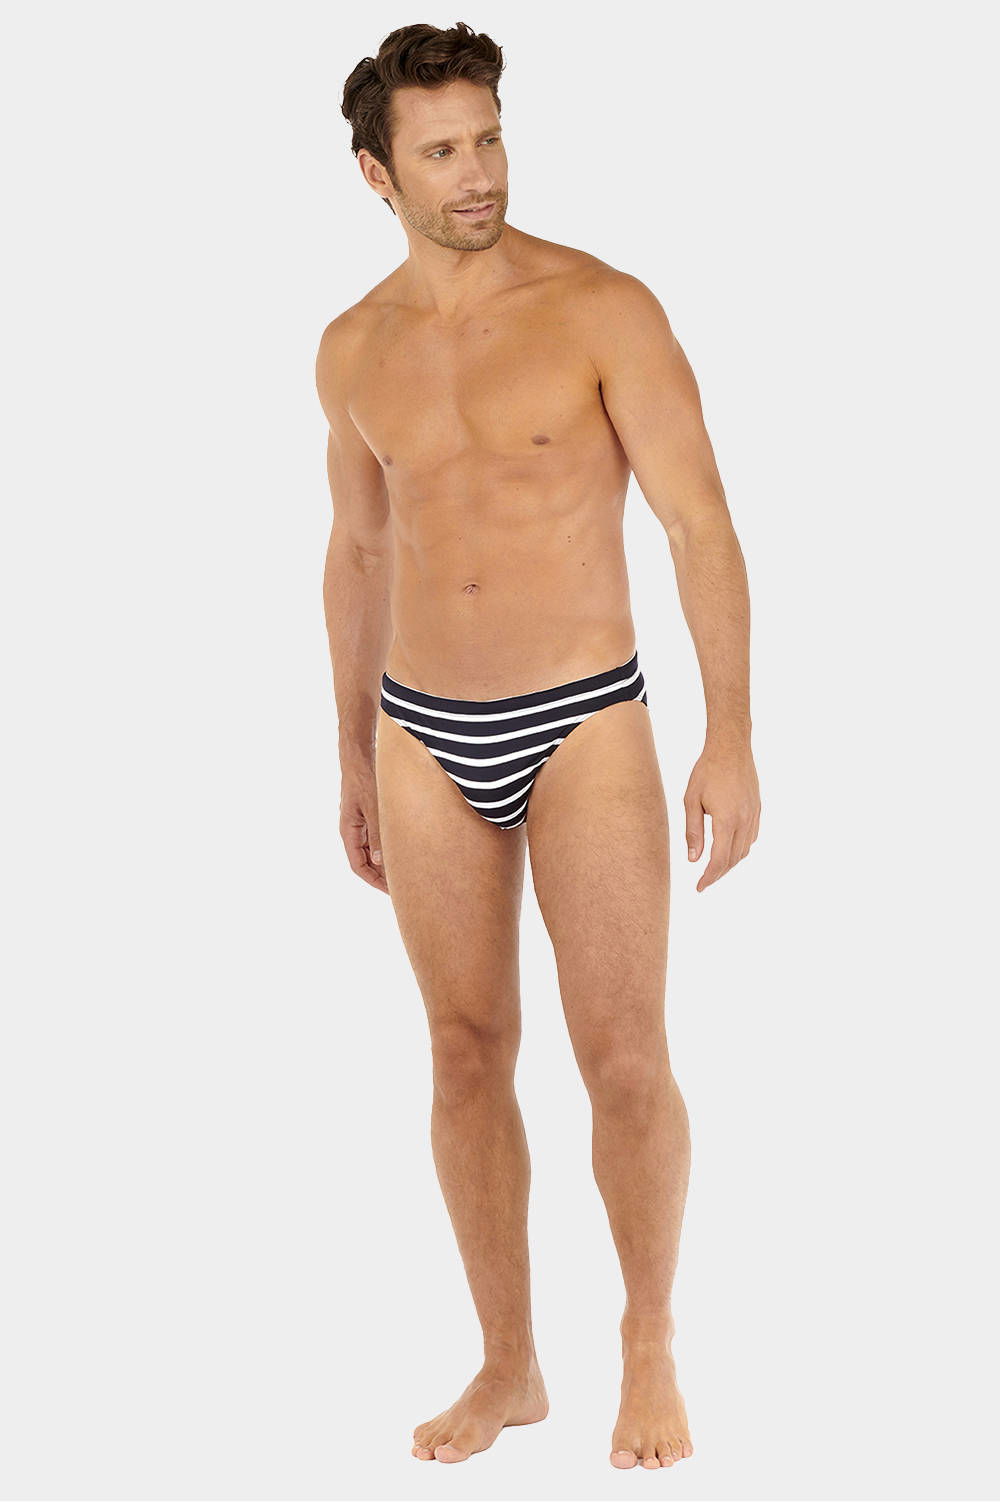 Feelgood underwear for men – waiting for you today on DGU - Dead